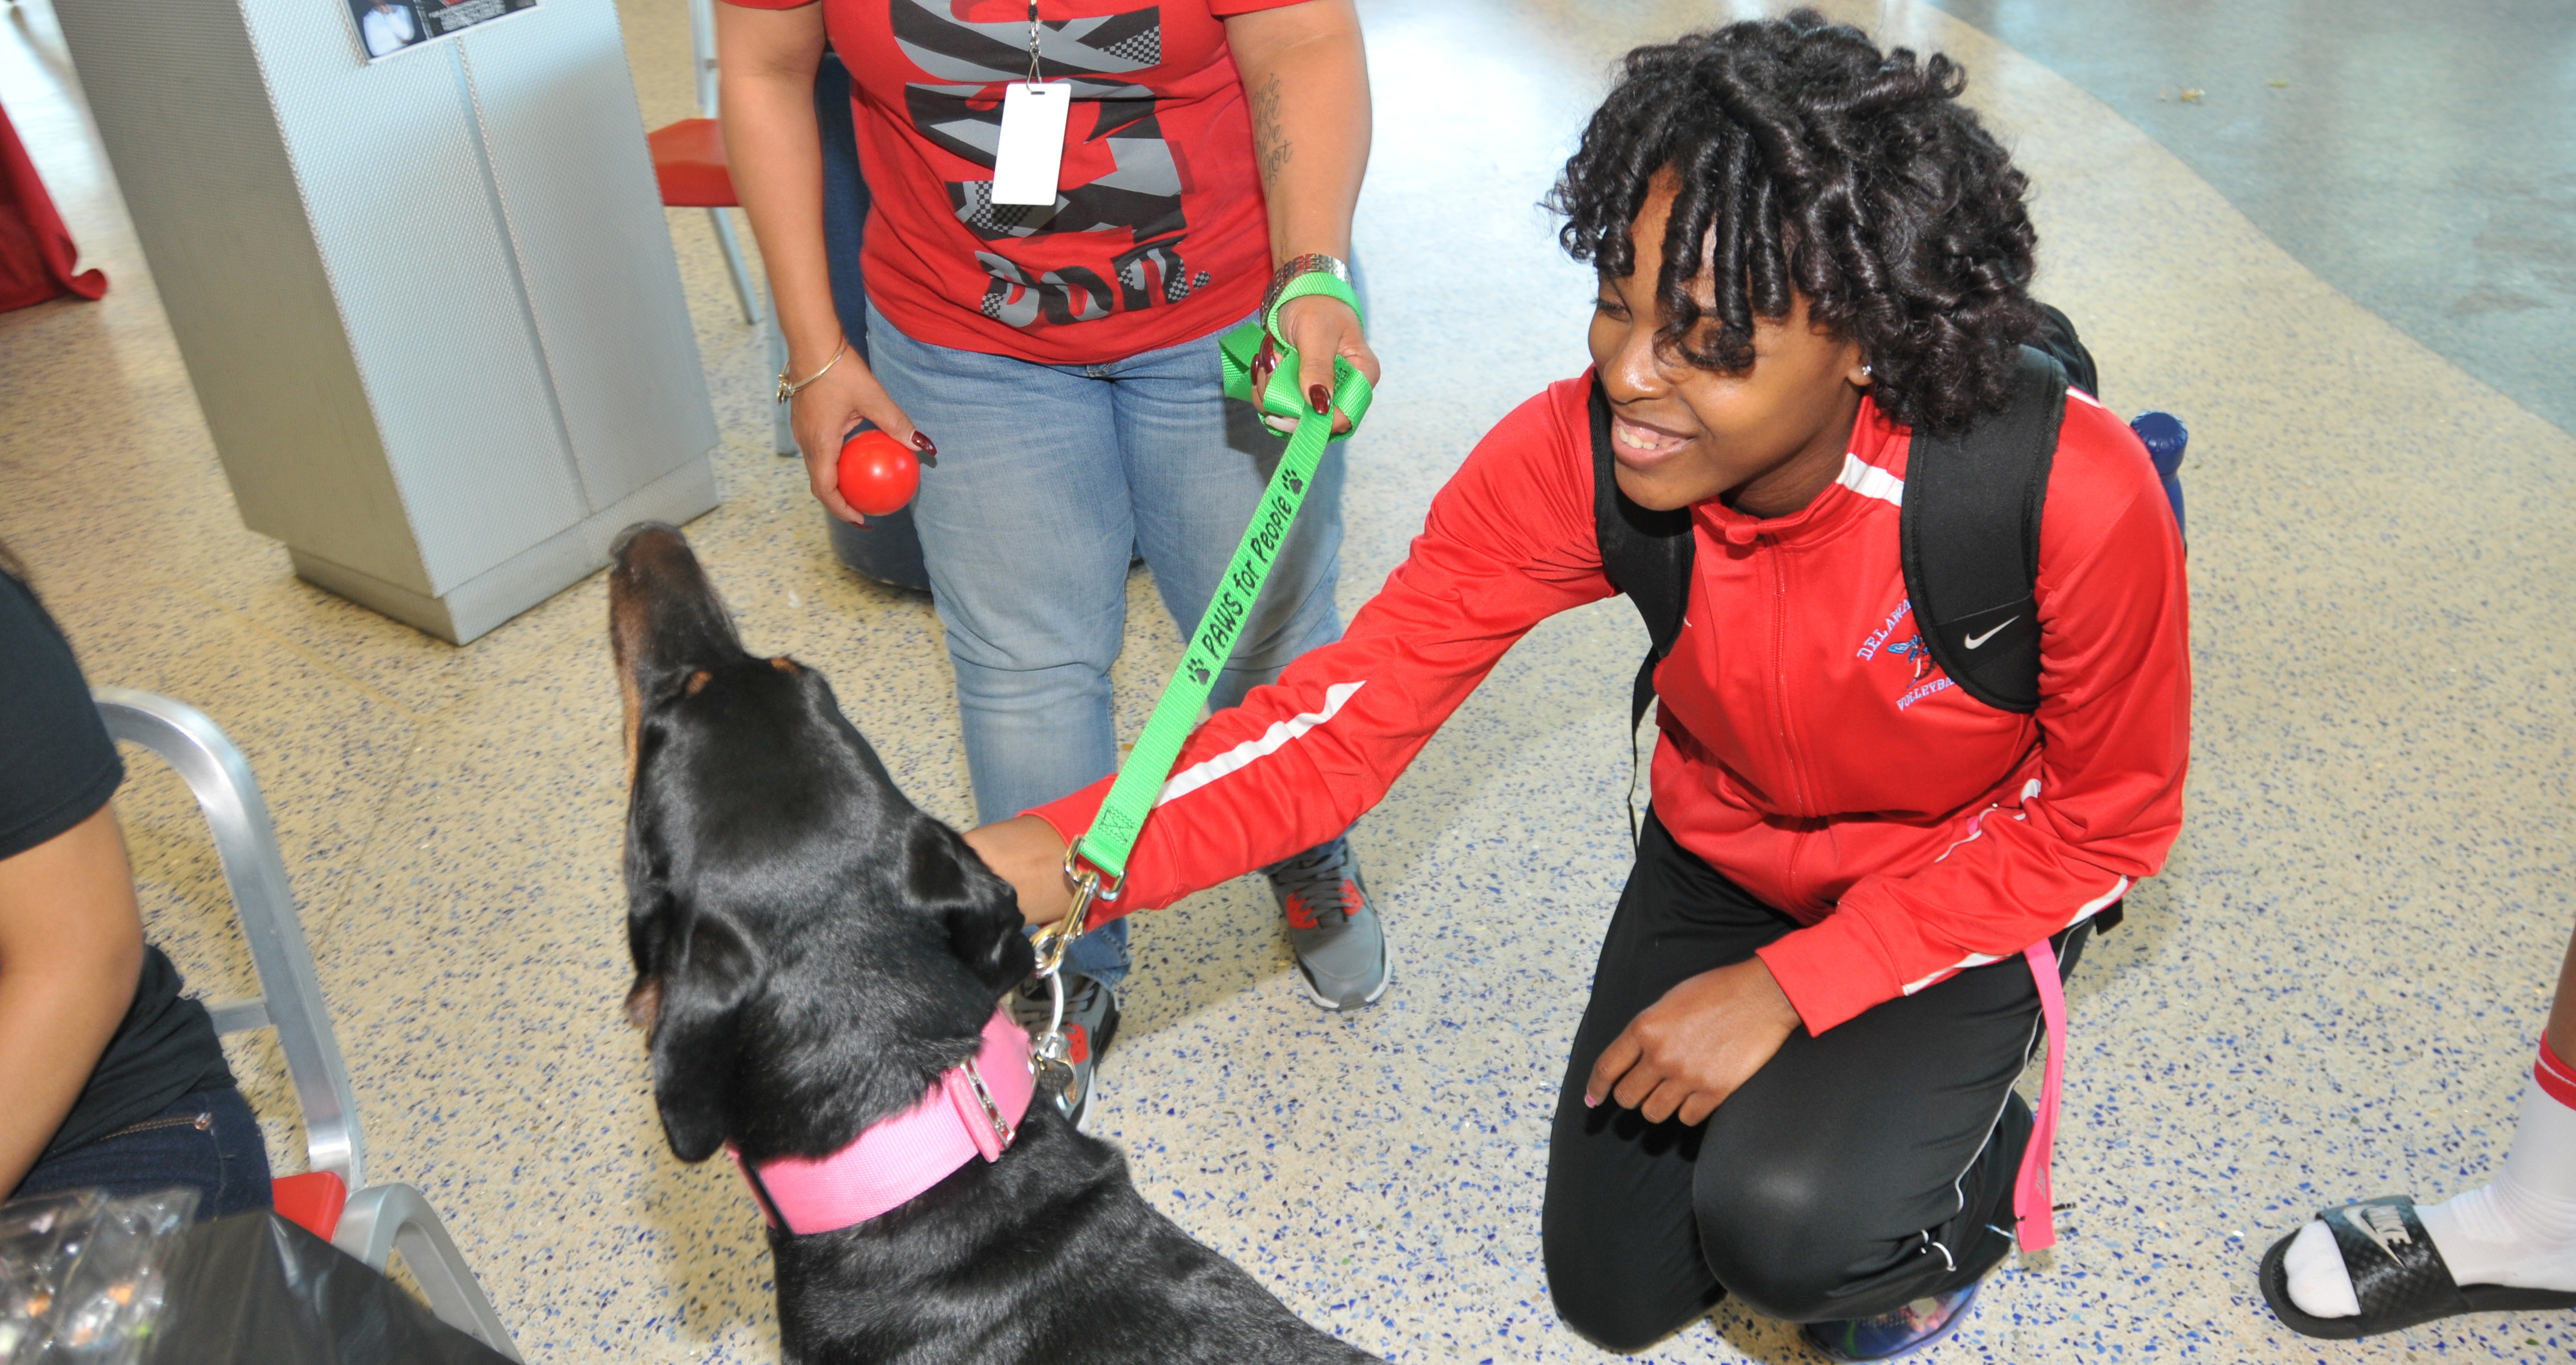 A DSU student learns how pet therapy can reduce stress and anxiety. Such information was shared as part of the National Public Health Week activities in the MLK Jr. Student Center on April 5.